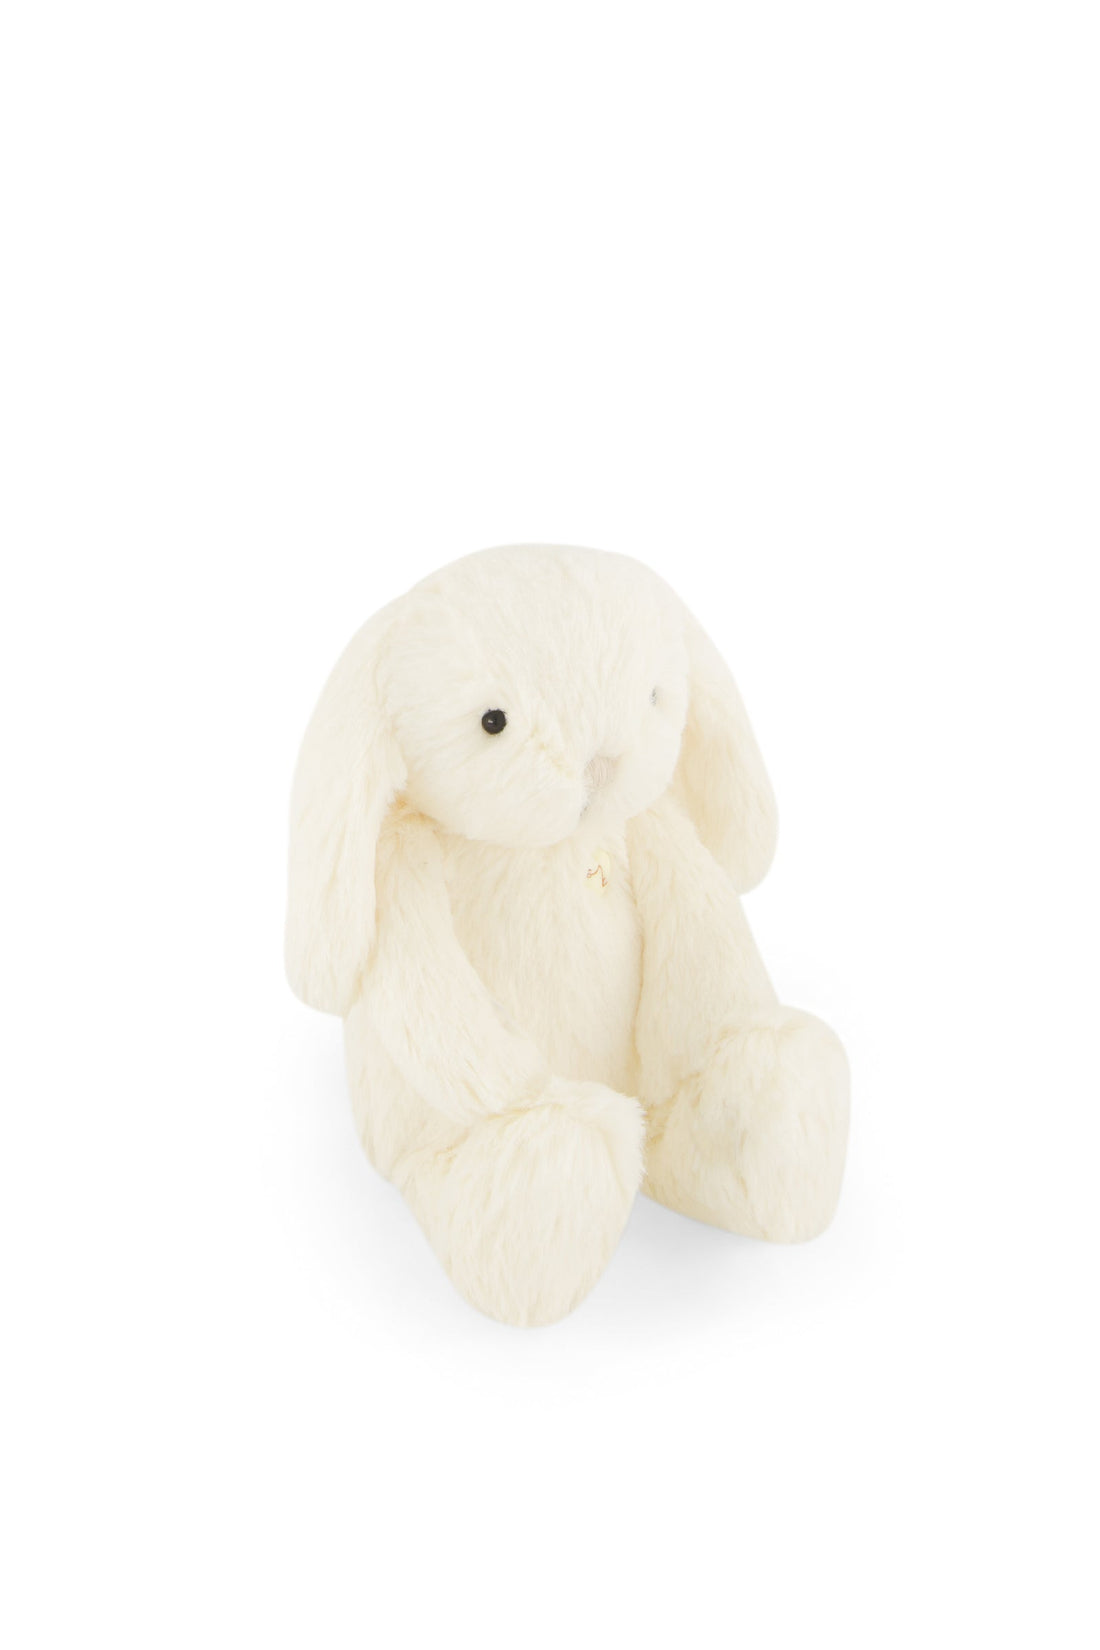 Snuggle Bunnies - Penelope the Bunny - Marshmallow Childrens Toy from Jamie Kay USA